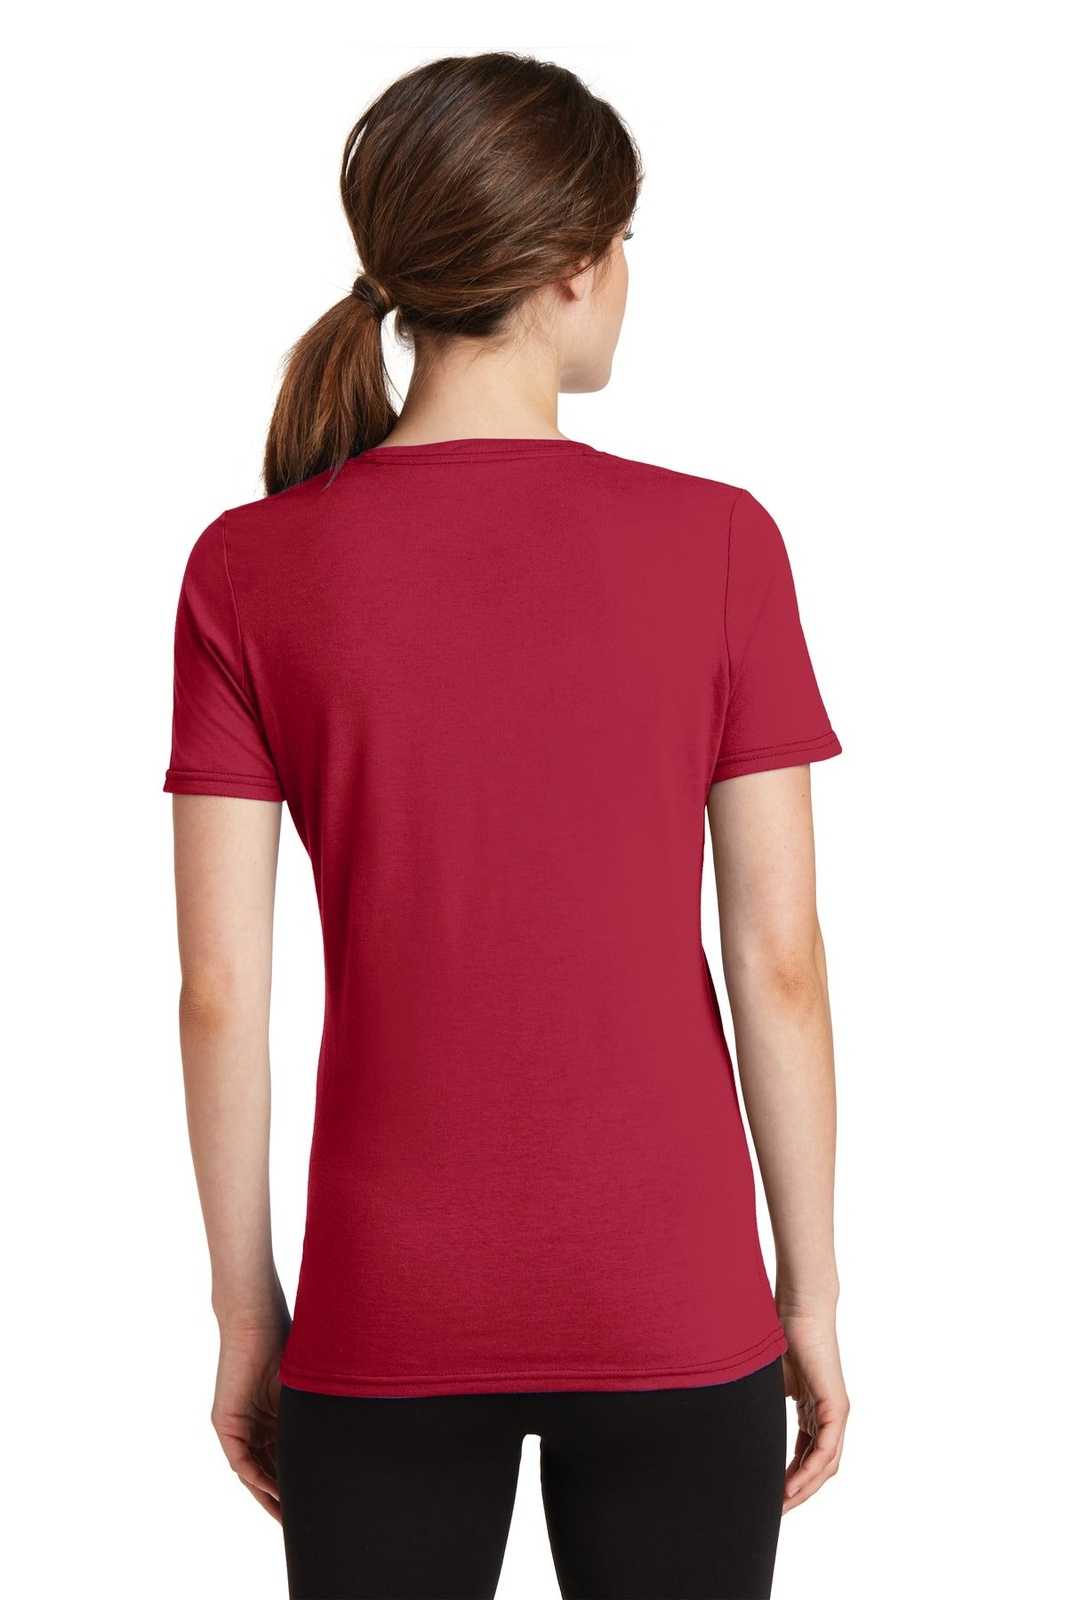 Port &amp; Company LPC381V Ladies Performance Blend V-Neck Tee - Red - HIT a Double - 2